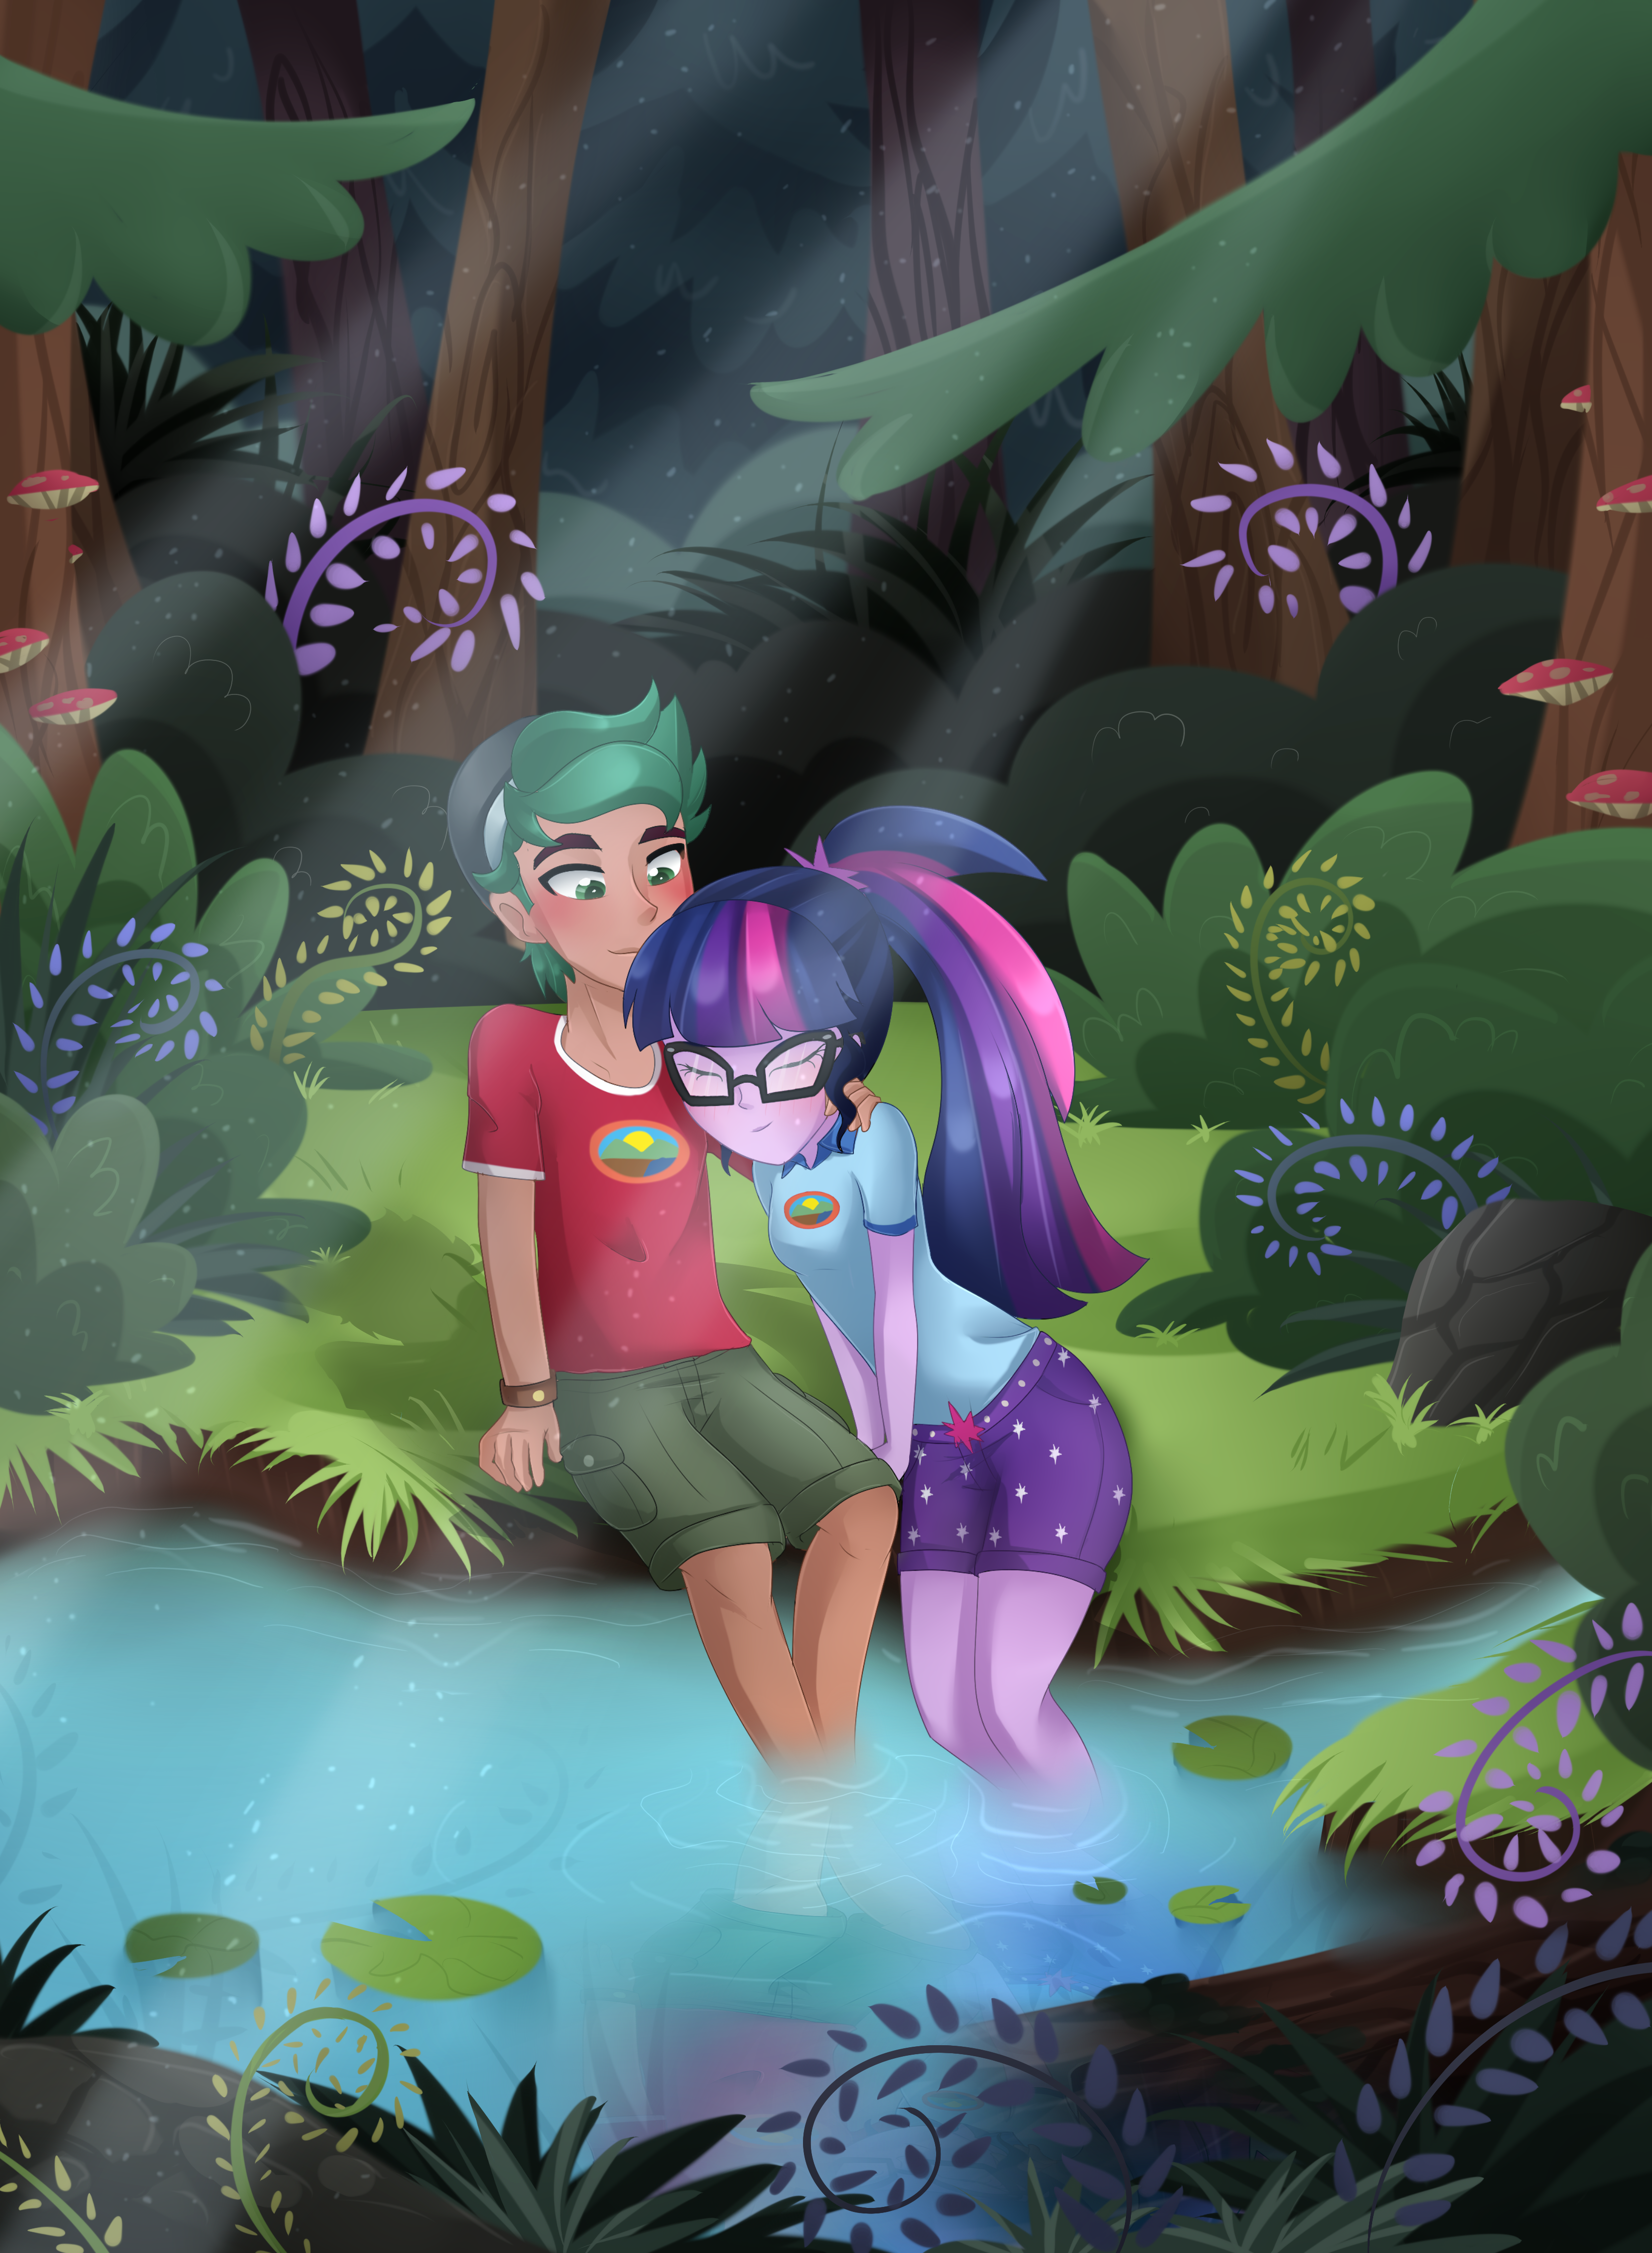 My Little Pony: Equestria Girls - Legend of Everfree Art by scarlett-sketches